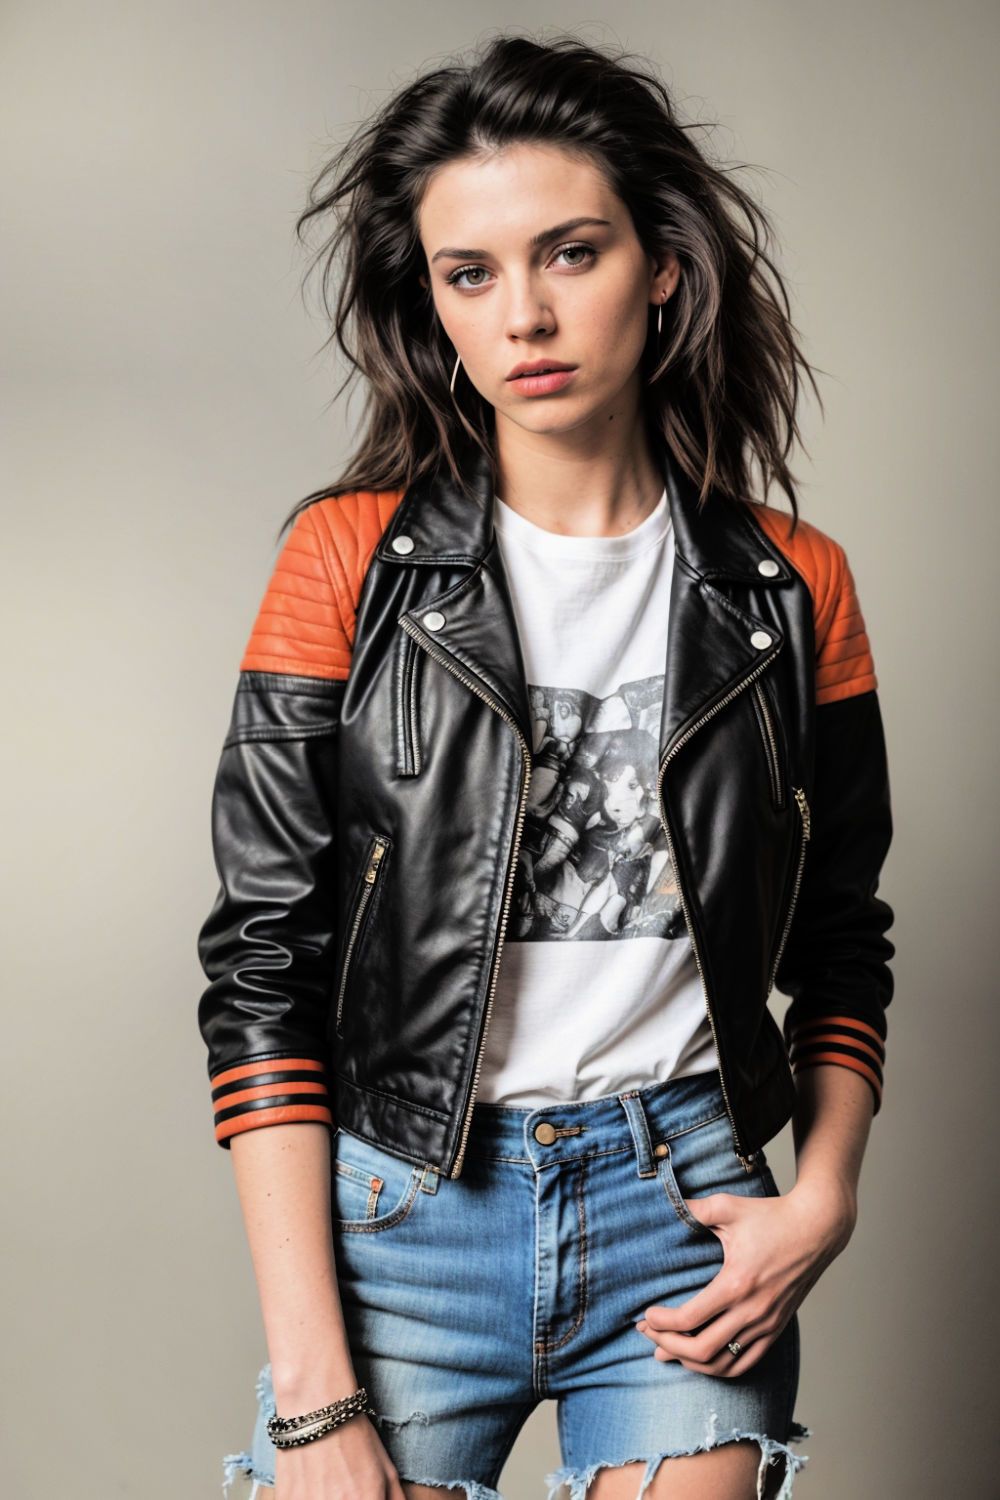 graphic tee and leather jacket for casual meetups